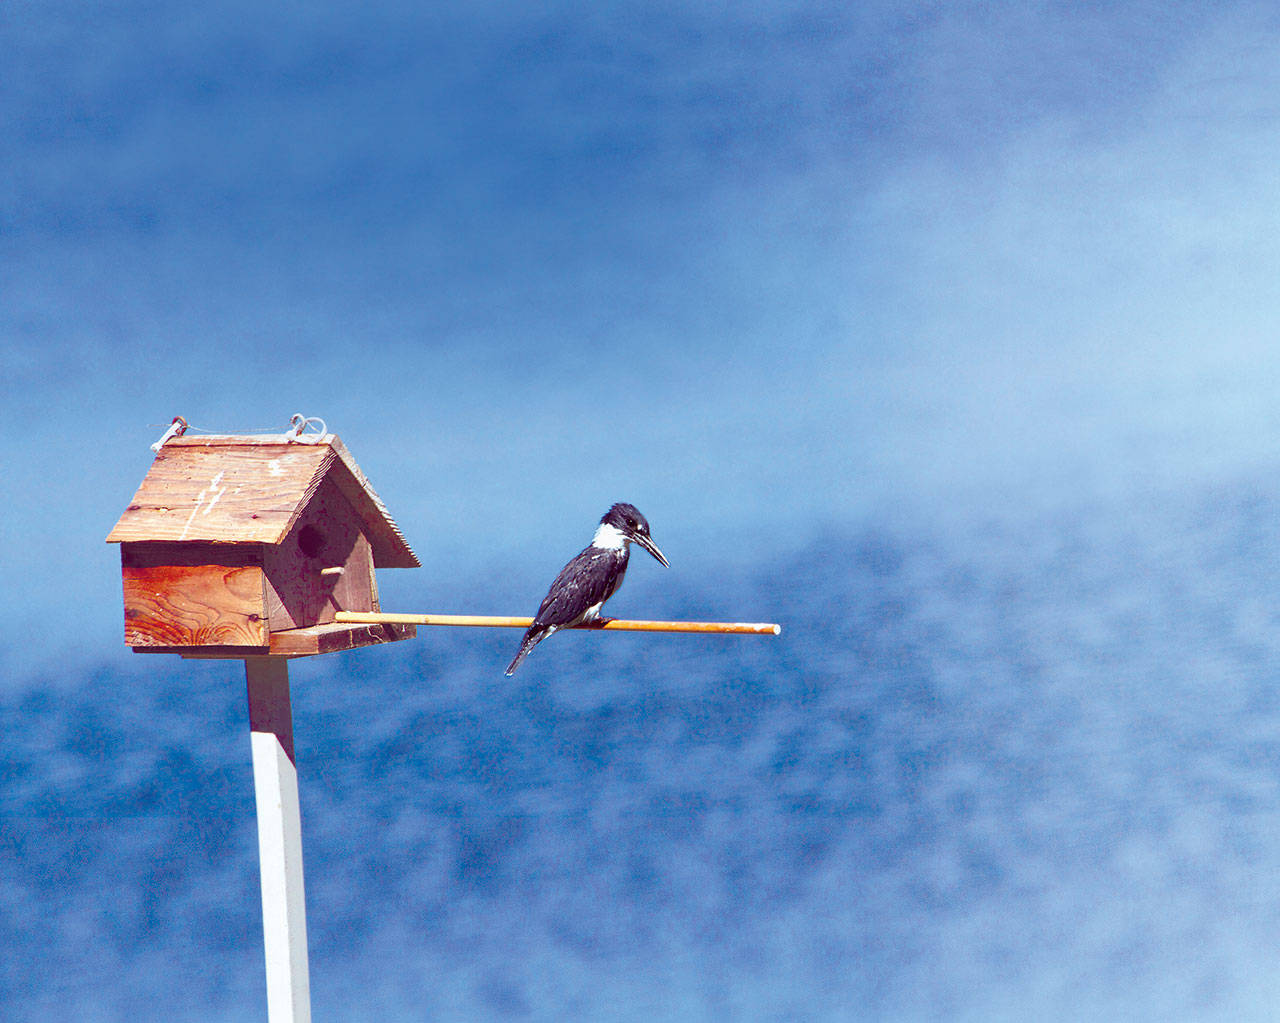 Tulalip Bay's belted kingfishers are kings of the waterfront